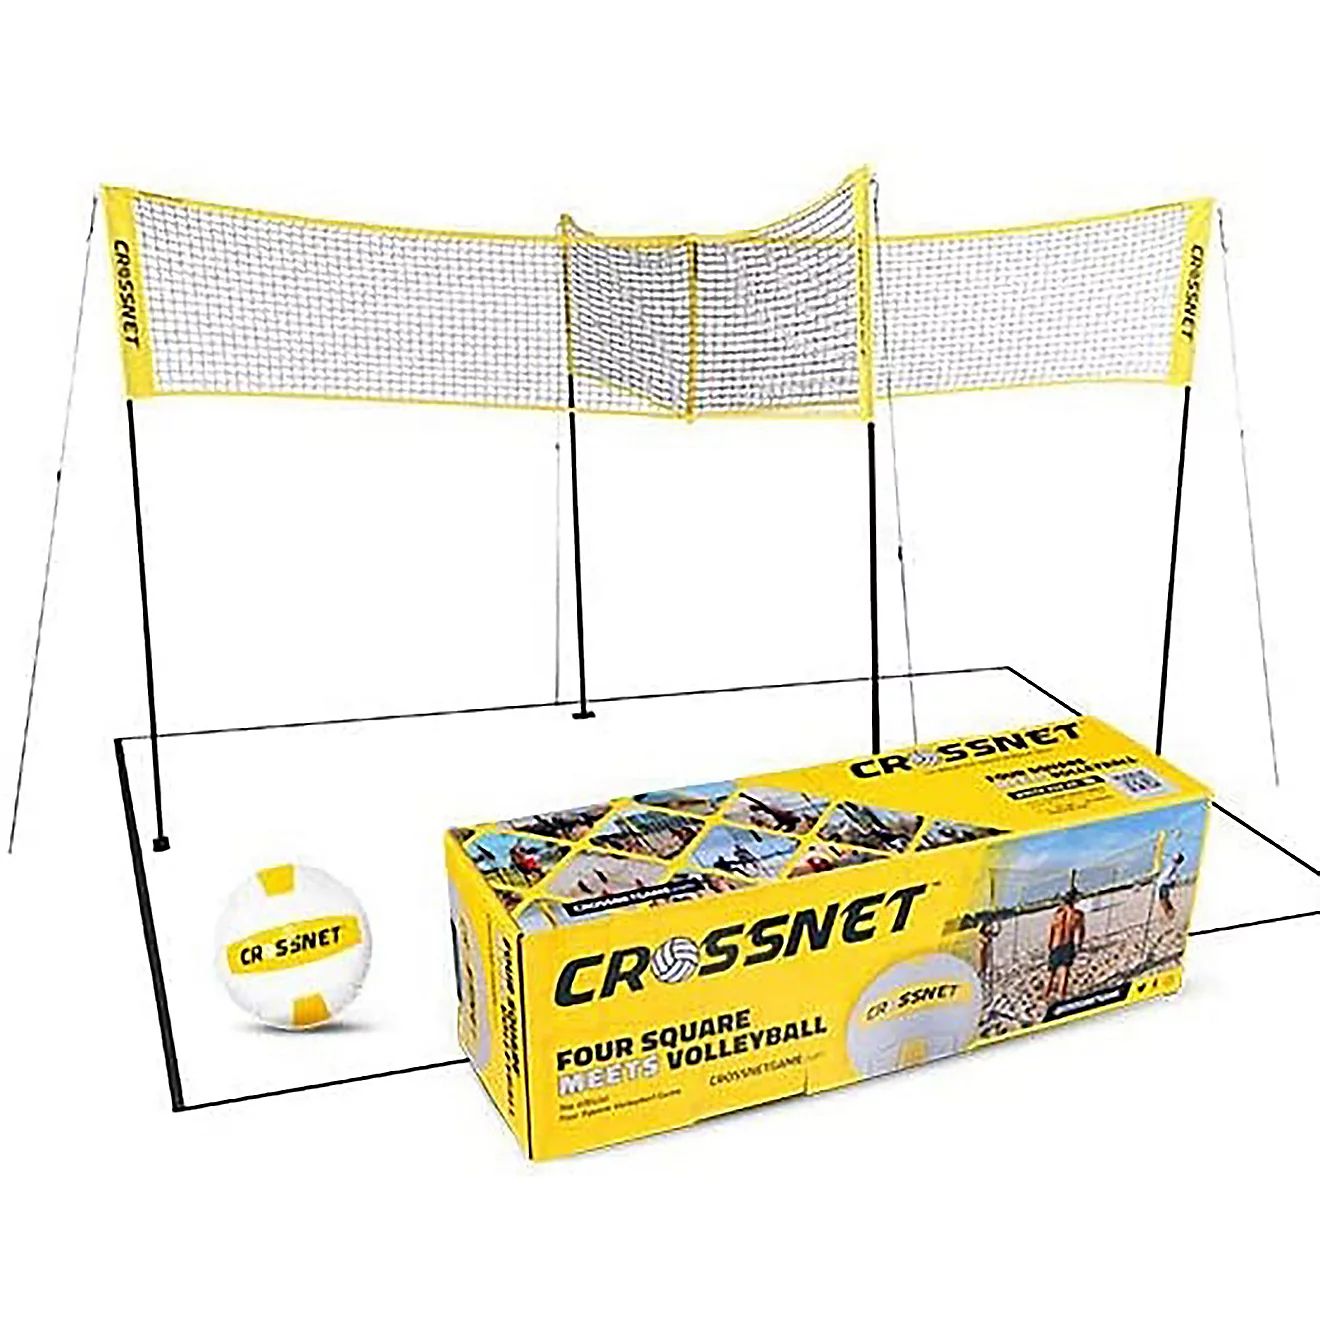 CROSSNET 4-Way Volleyball Game | Academy Sports + Outdoors